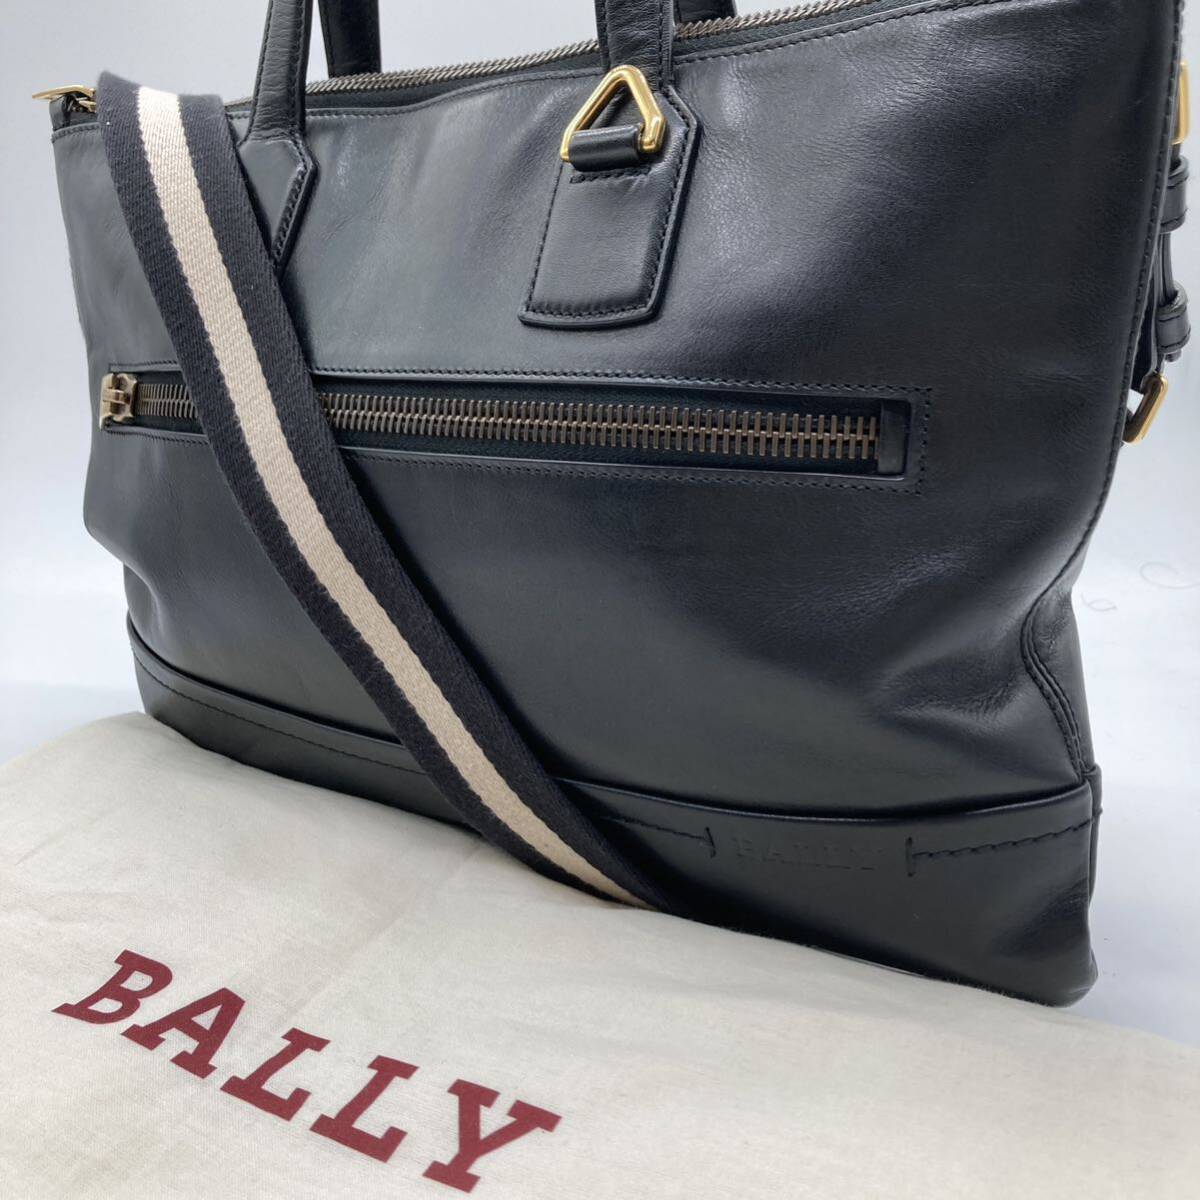 1 jpy [ ultimate beautiful goods ]BALLY Bally business bag briefcase to rain spo ting2way black black TAS380 leather A4 diagonal .. men's 